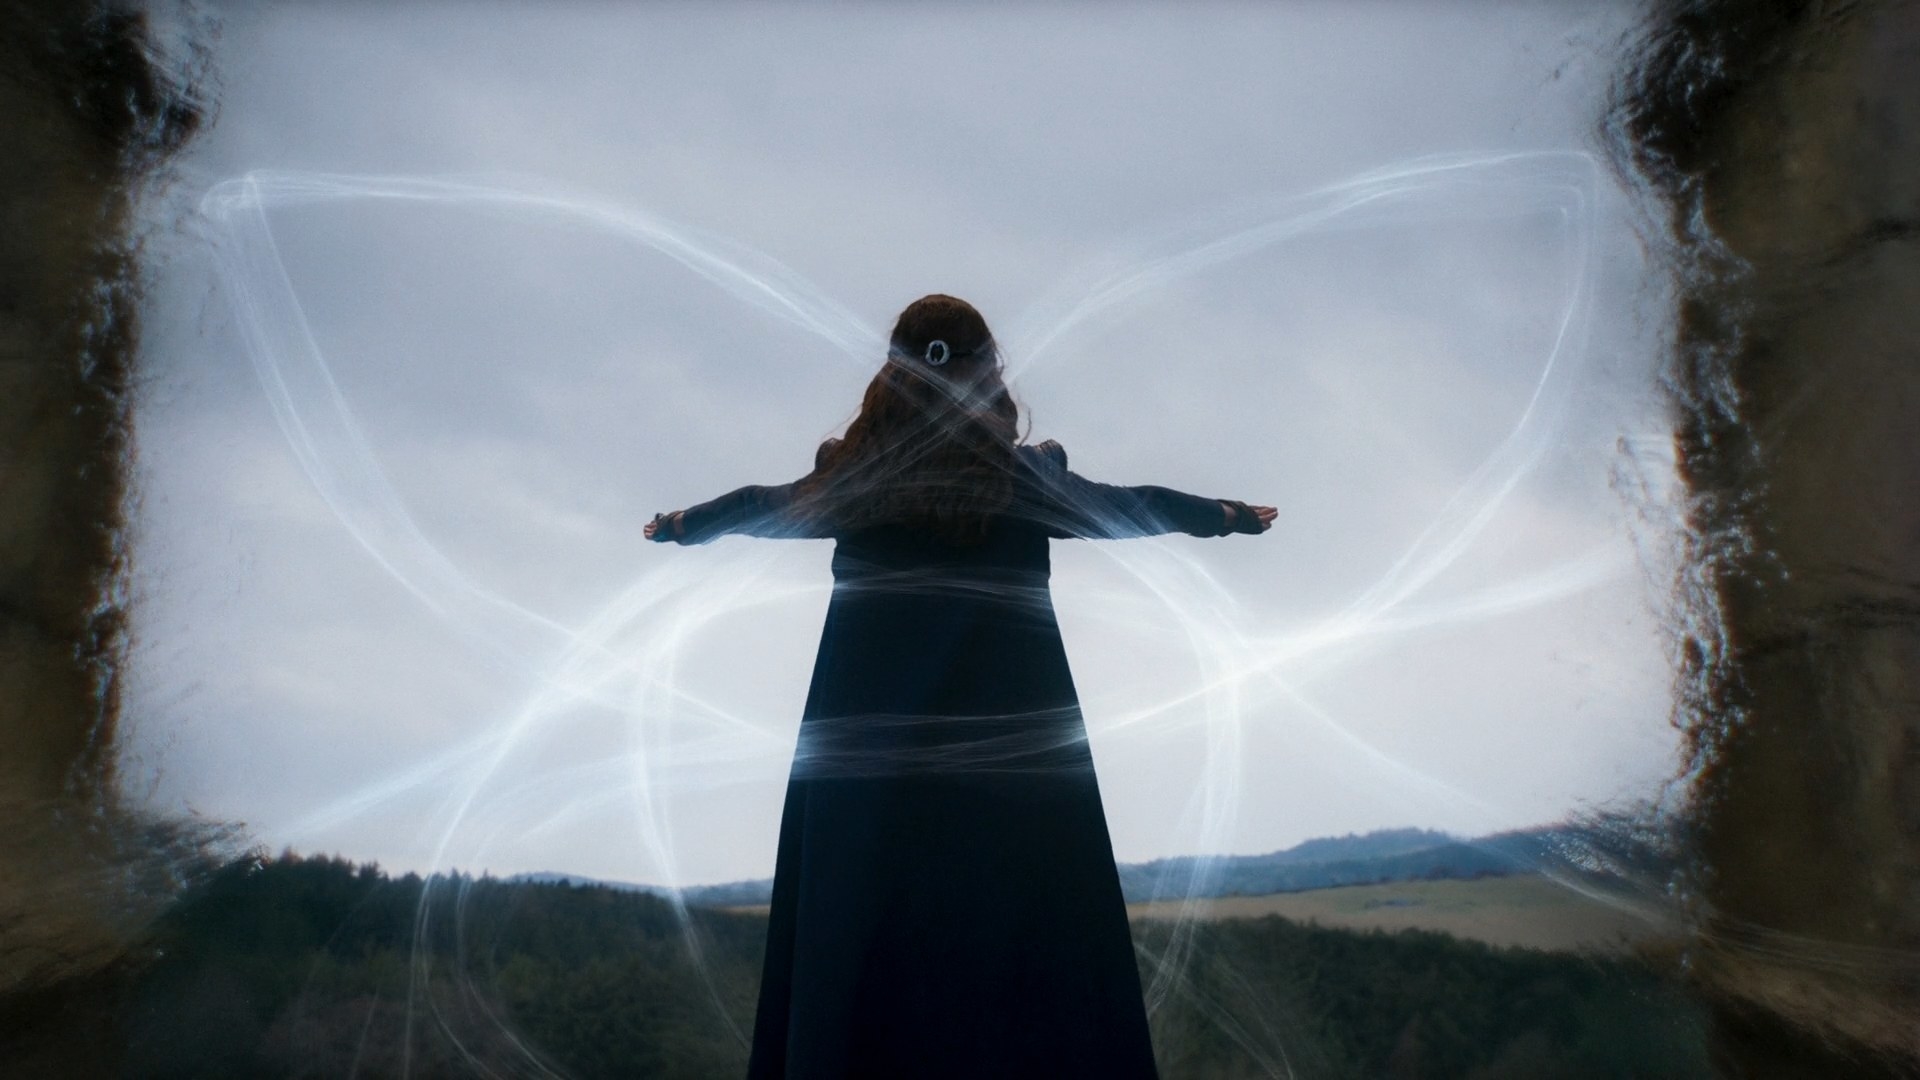 A shot of Moiraine’s back, weaving flows of the one power into the Waygate. The flows appear to be looping into a triangular shape, reminiscent of the trefoil Avendesora leaf.